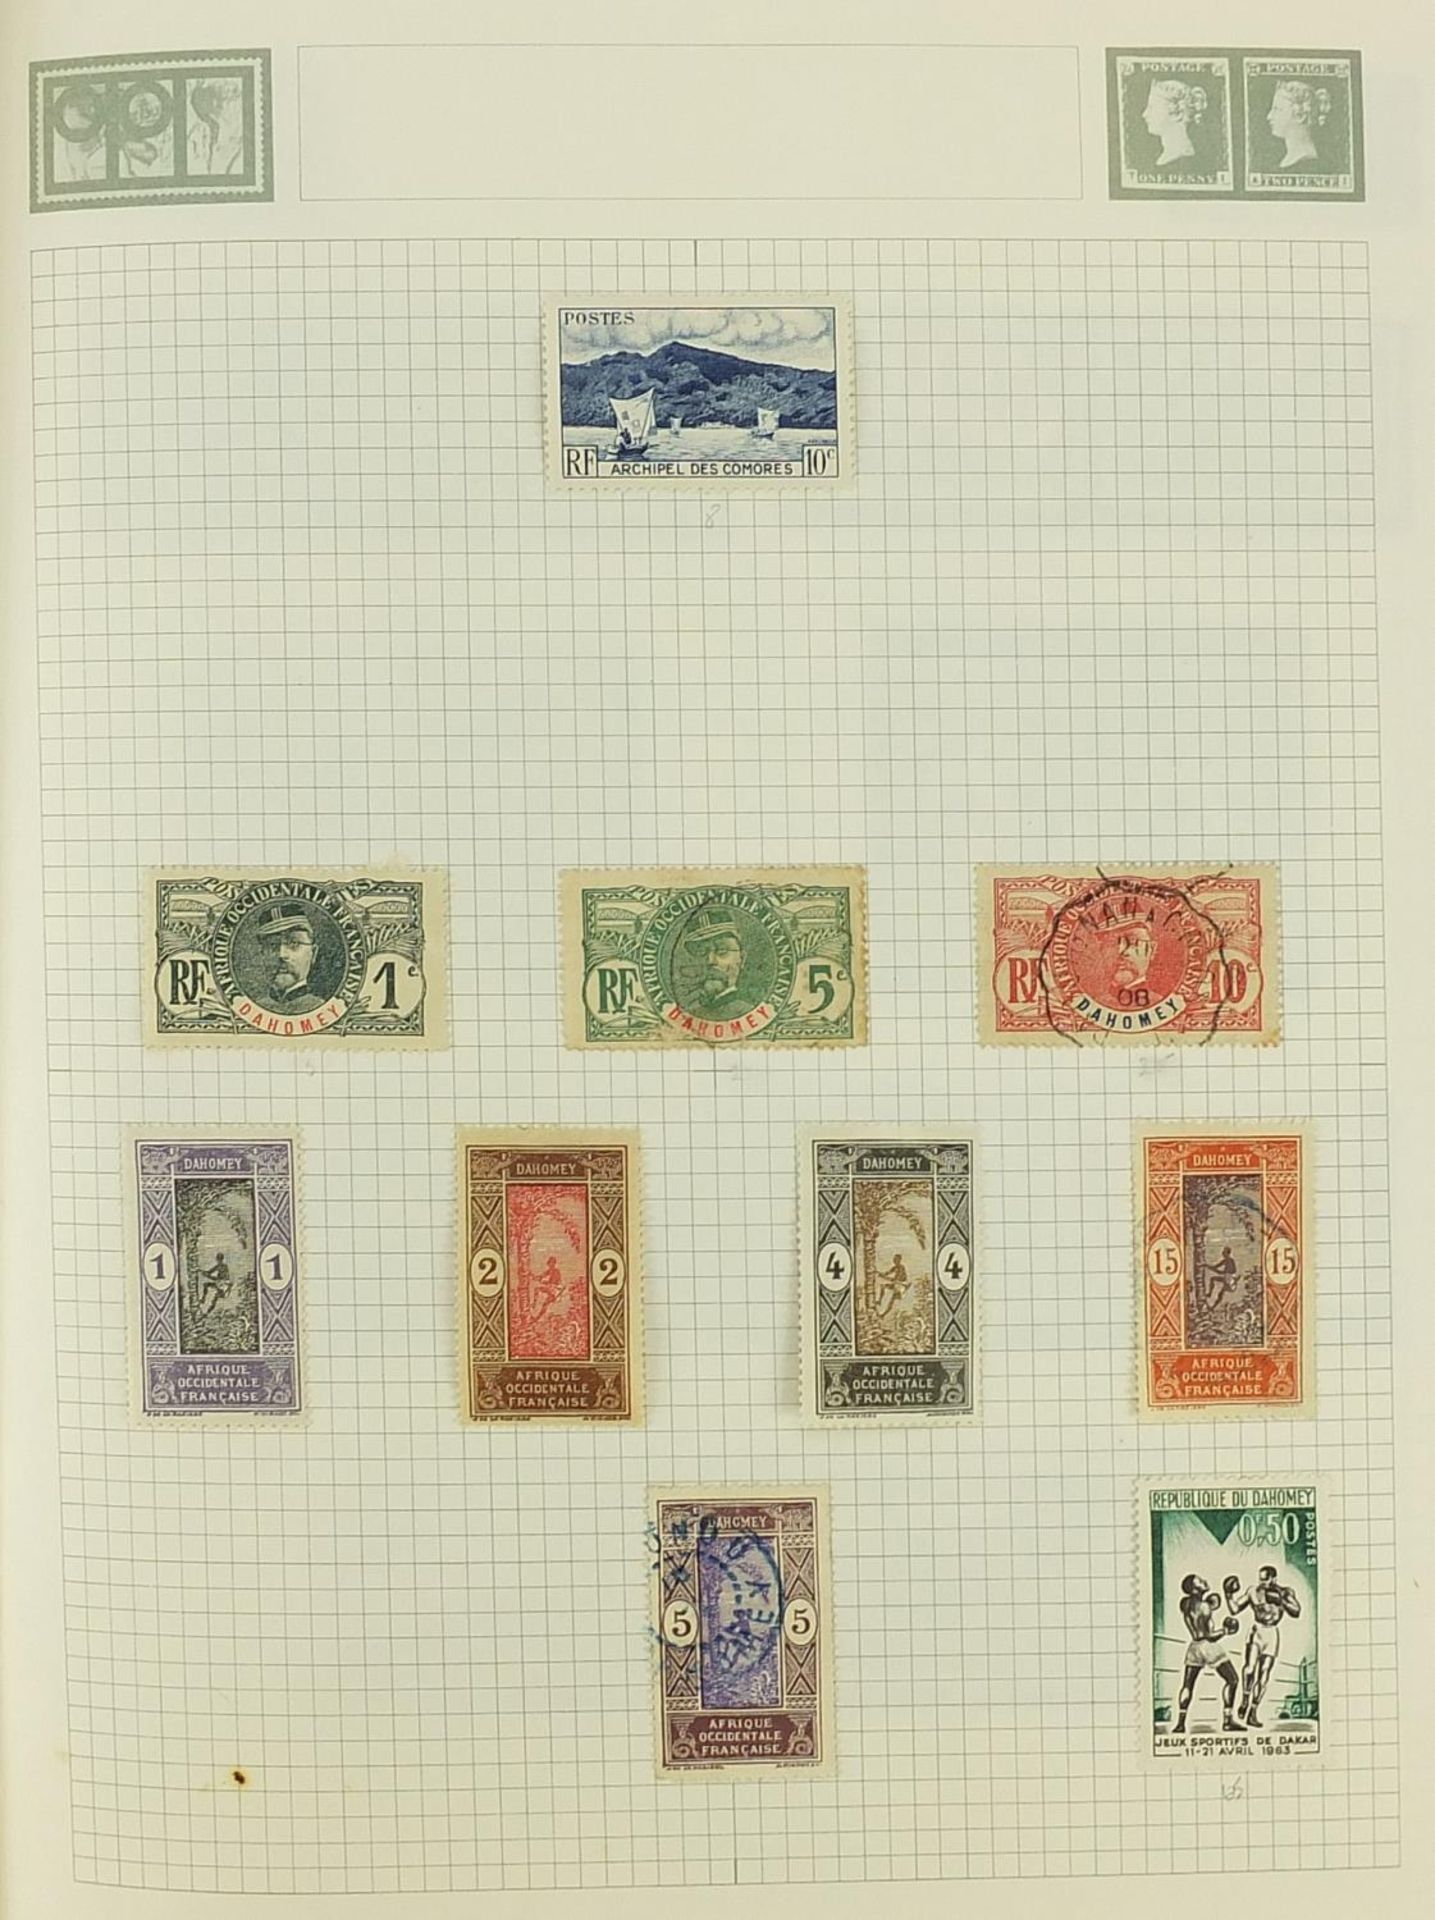 Collection of world stamps arranged in an album including Austria, Cuba and Europe